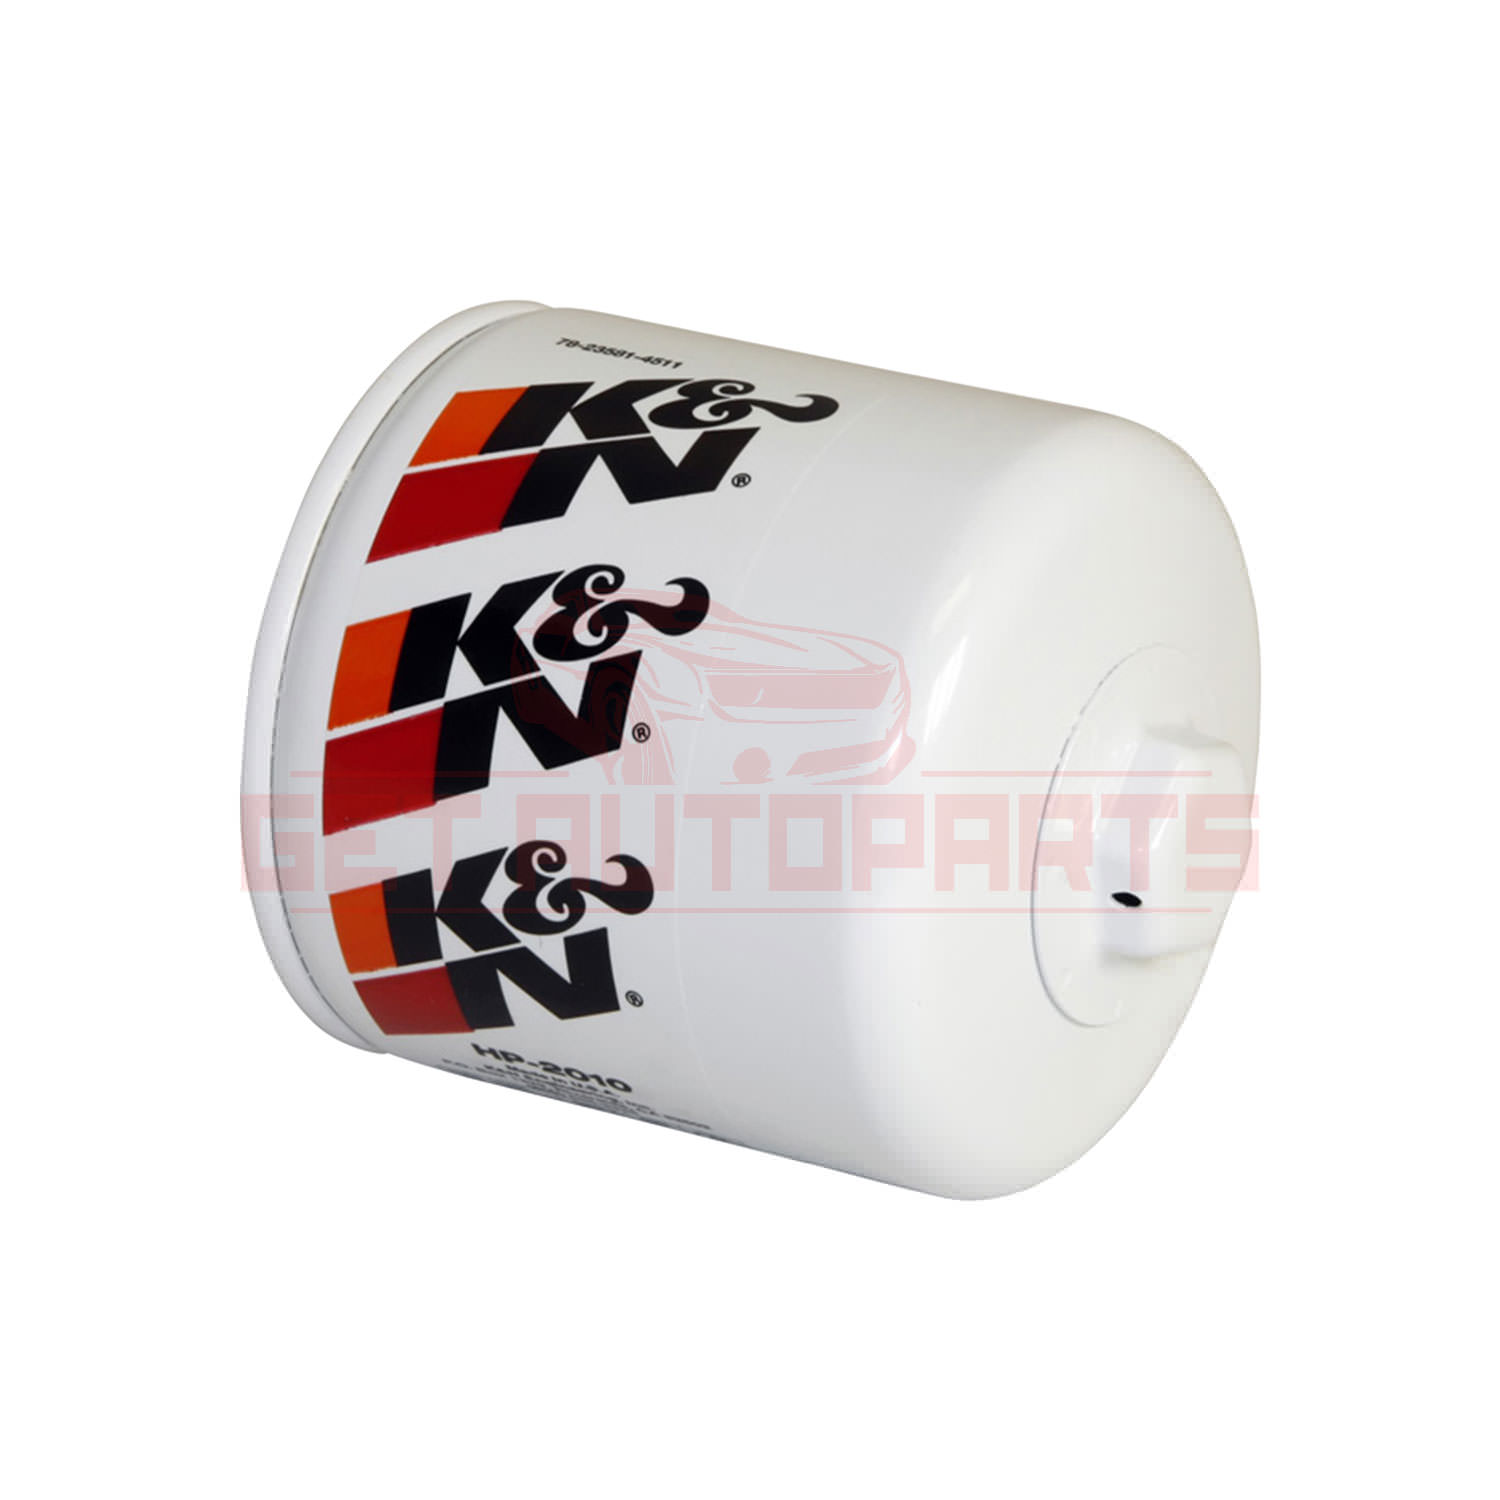 K&N Oil Filter for Ford E-150 Club Wagon 2003-05